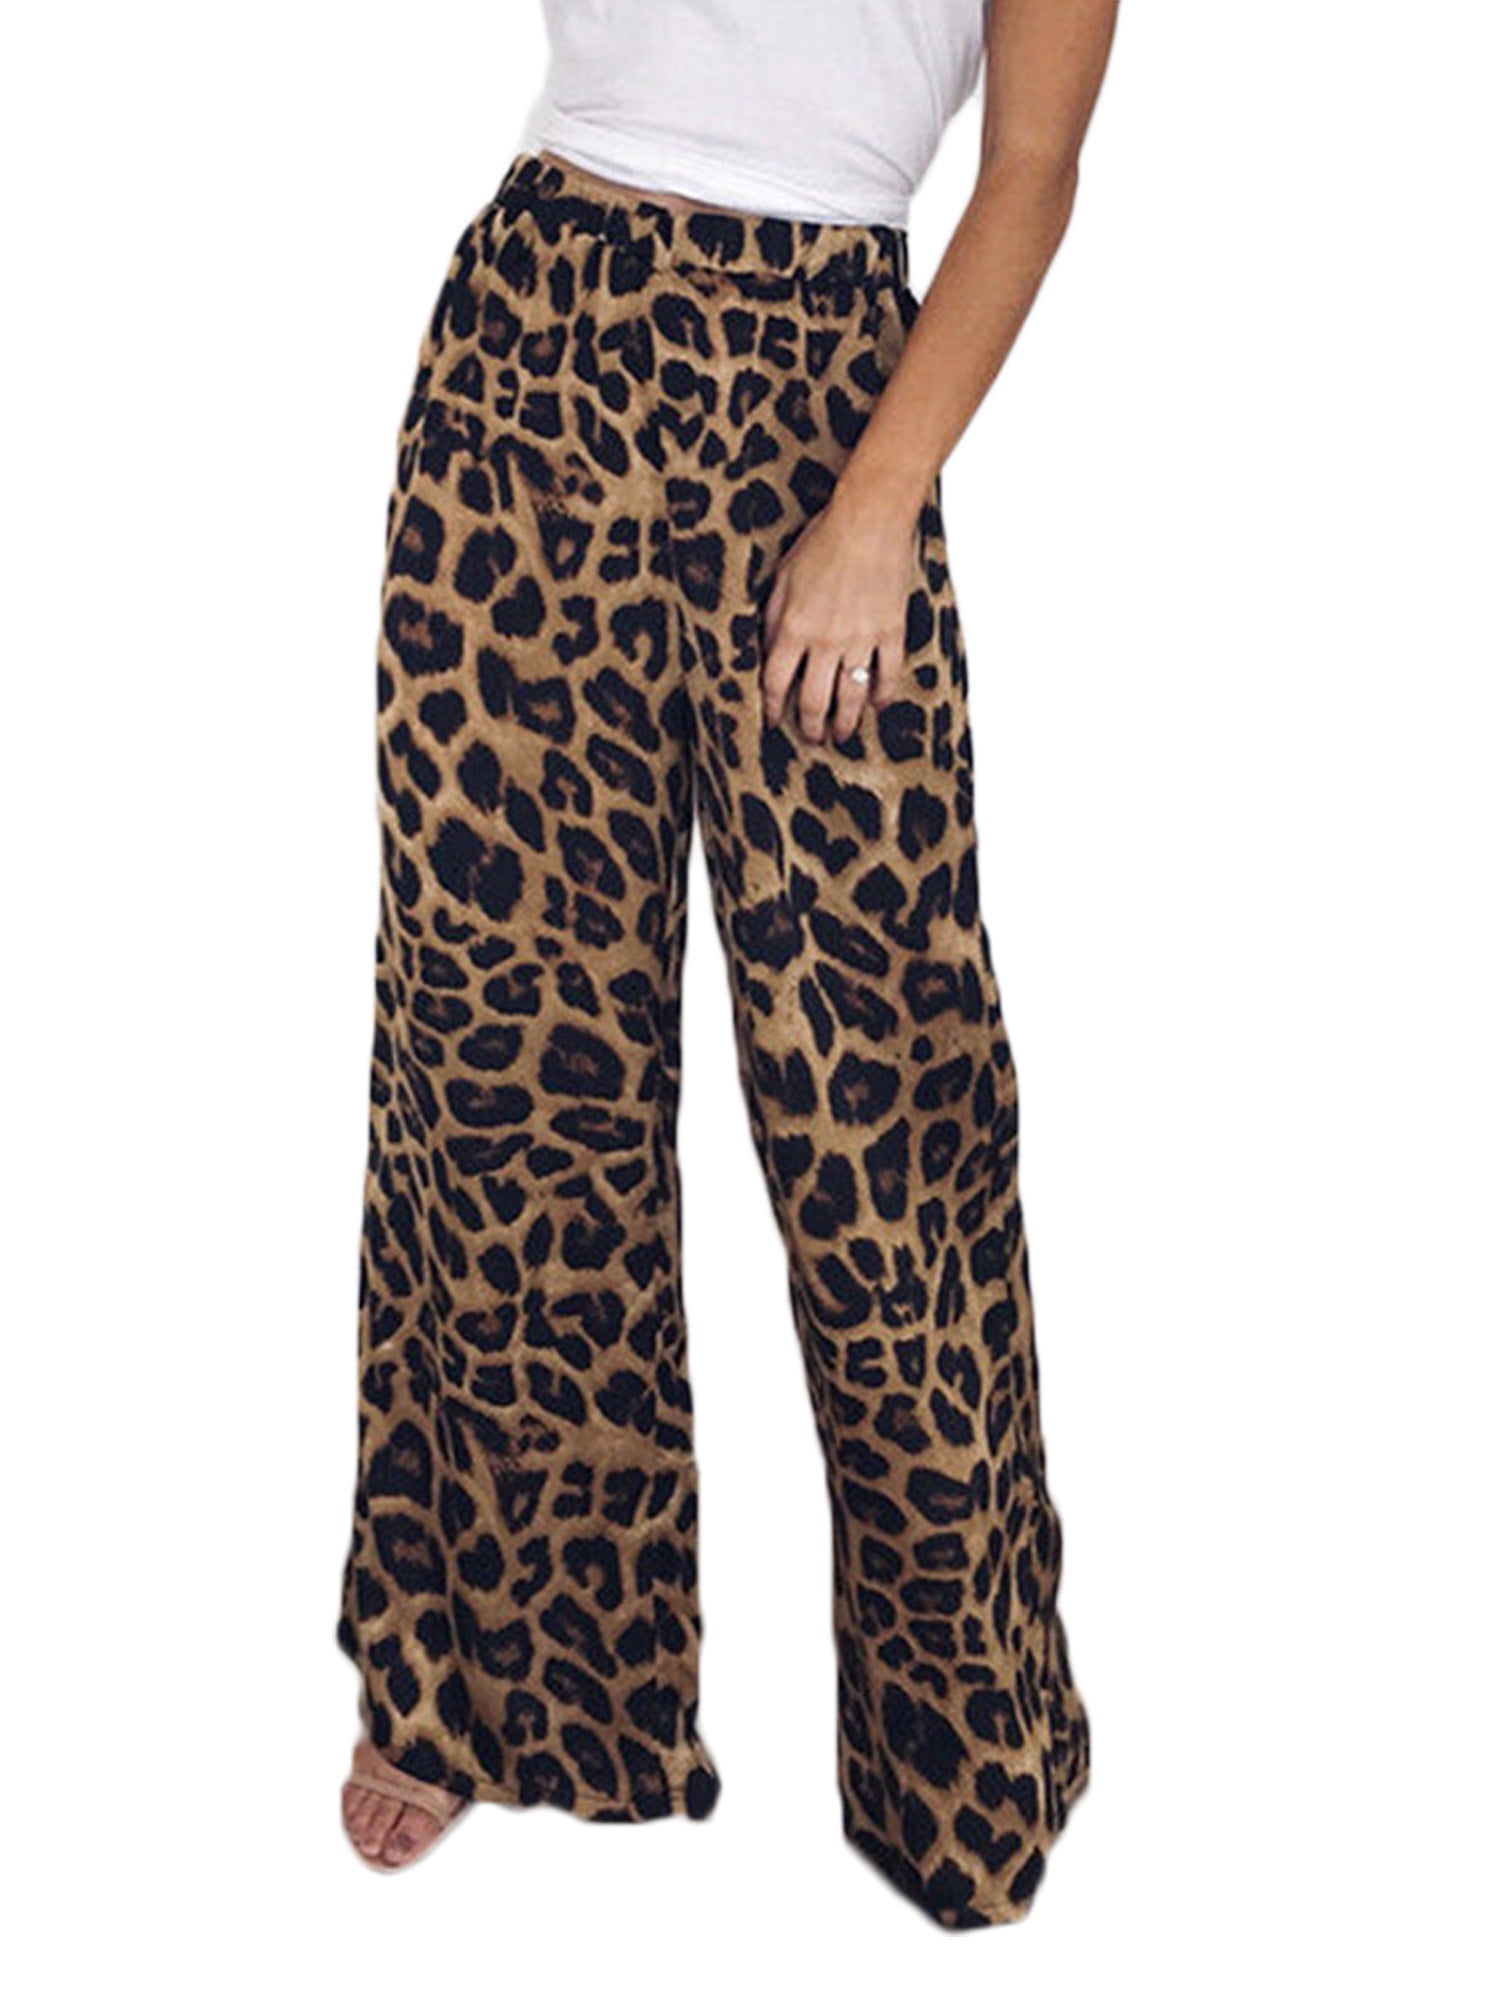 Women’s Leopard Printed High Waisted Wide Leg Trousers Casual Pockets Crop Pants 